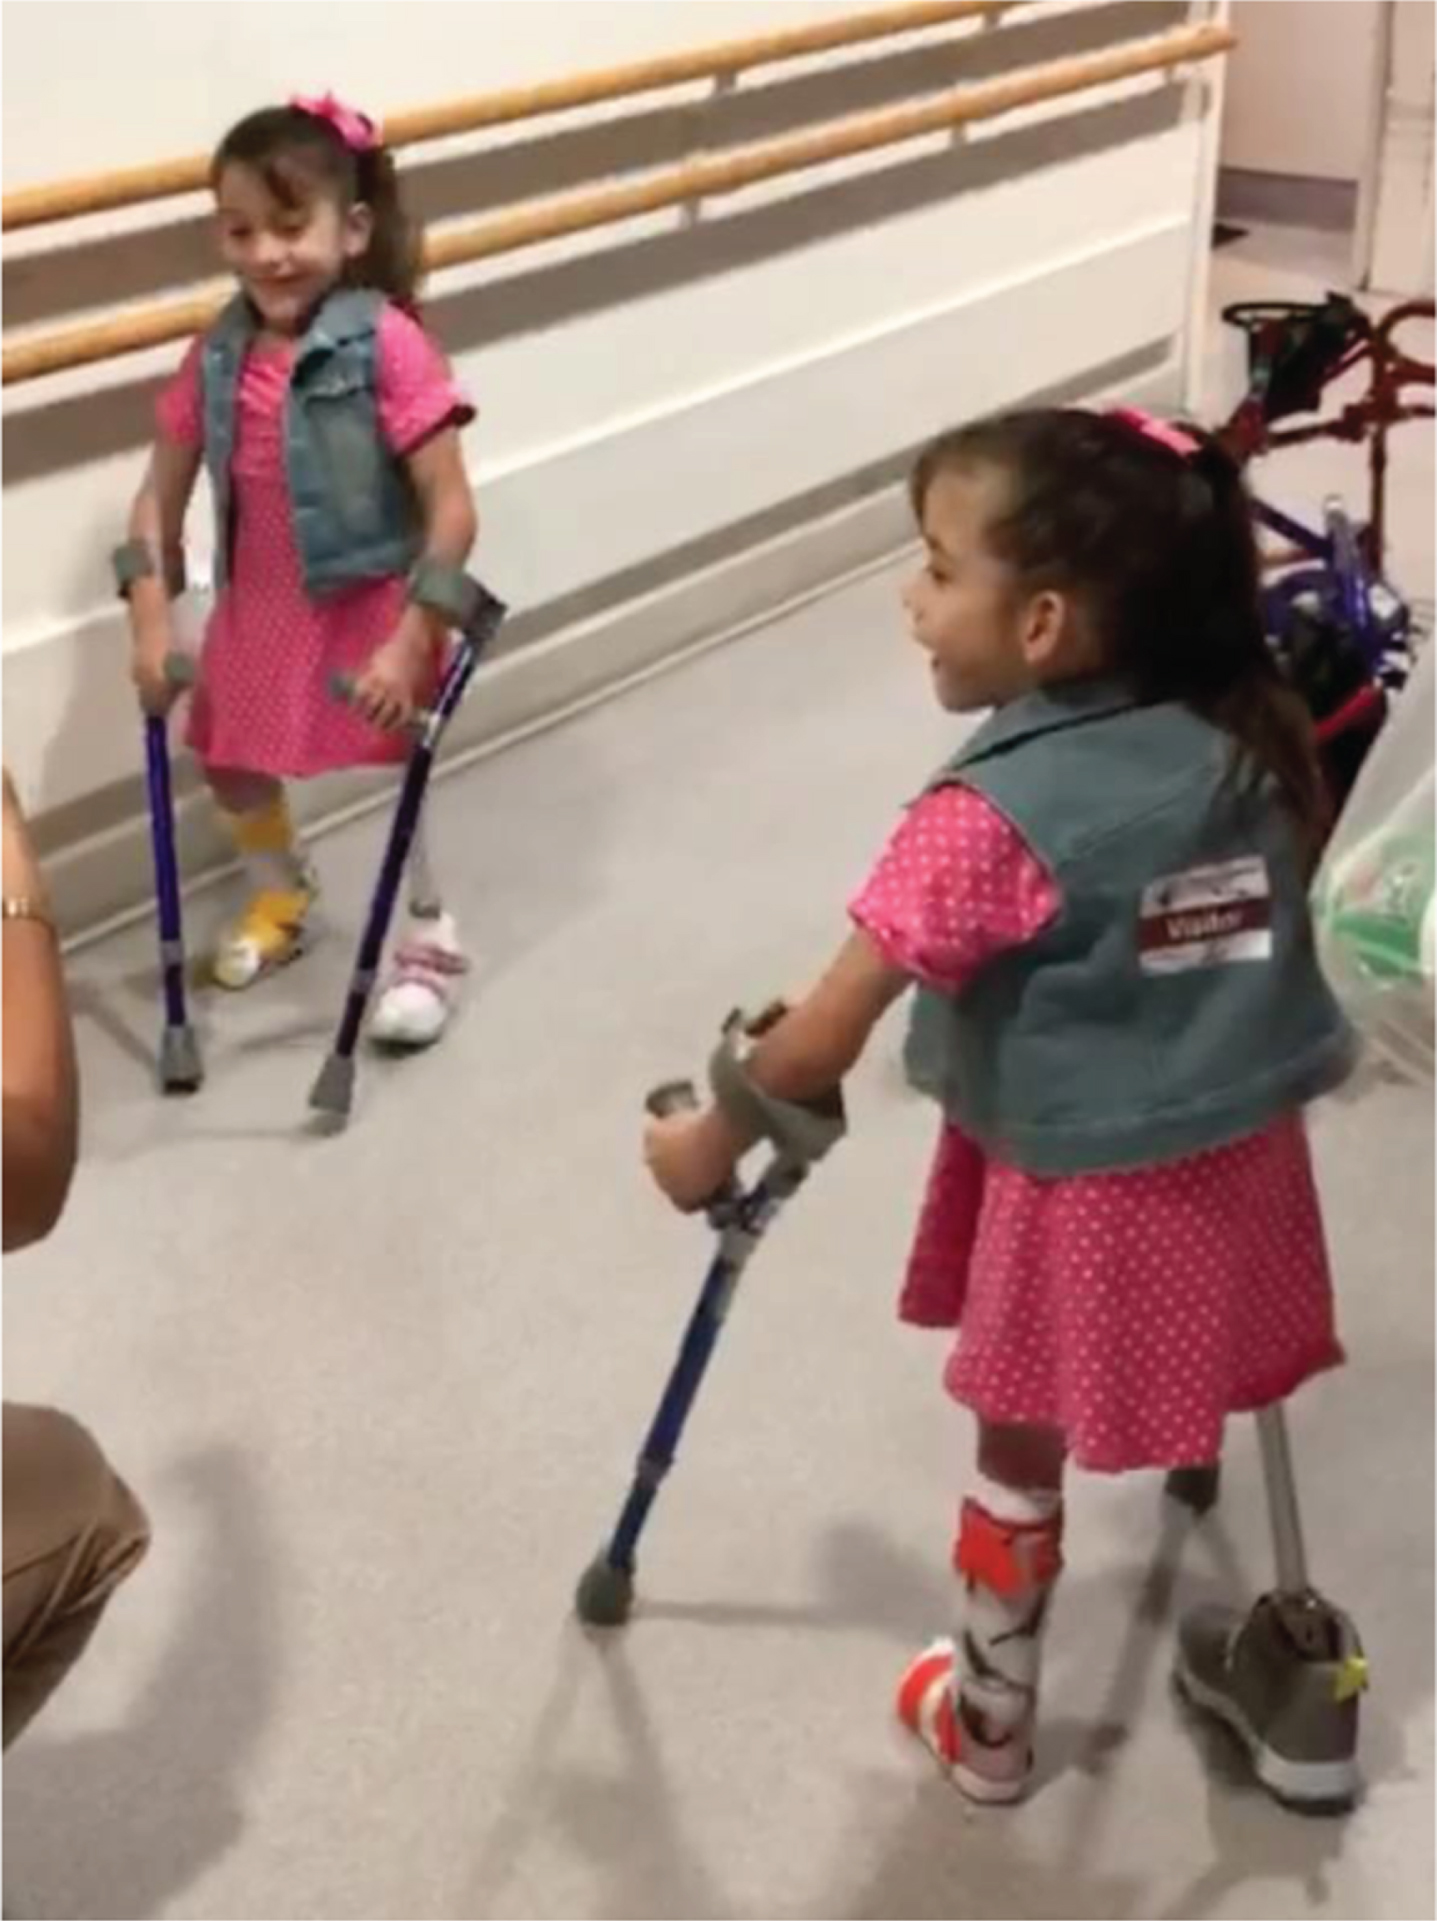 After several years with a walker, the twins progressed to using Lofstrand crutches. (Written photo consents obtained.)